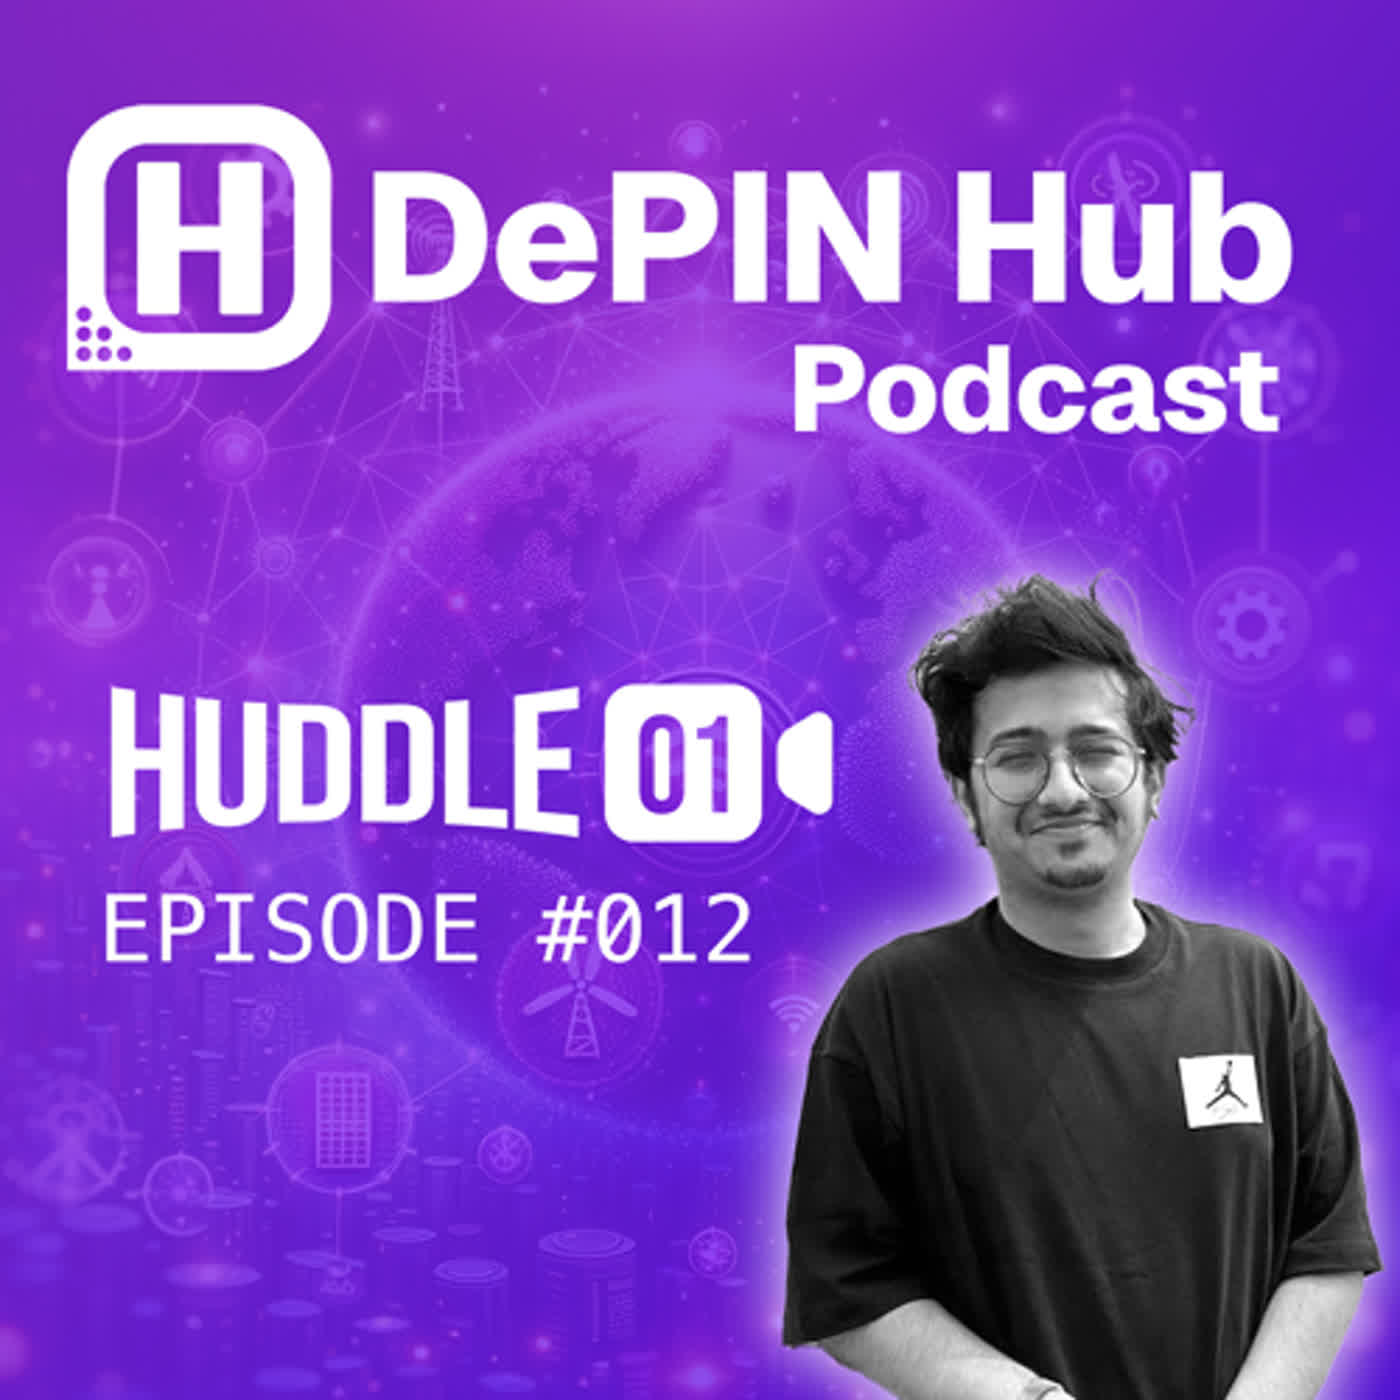 #012 - Huddle01 - Transforming your online meetings into rewarding experiences